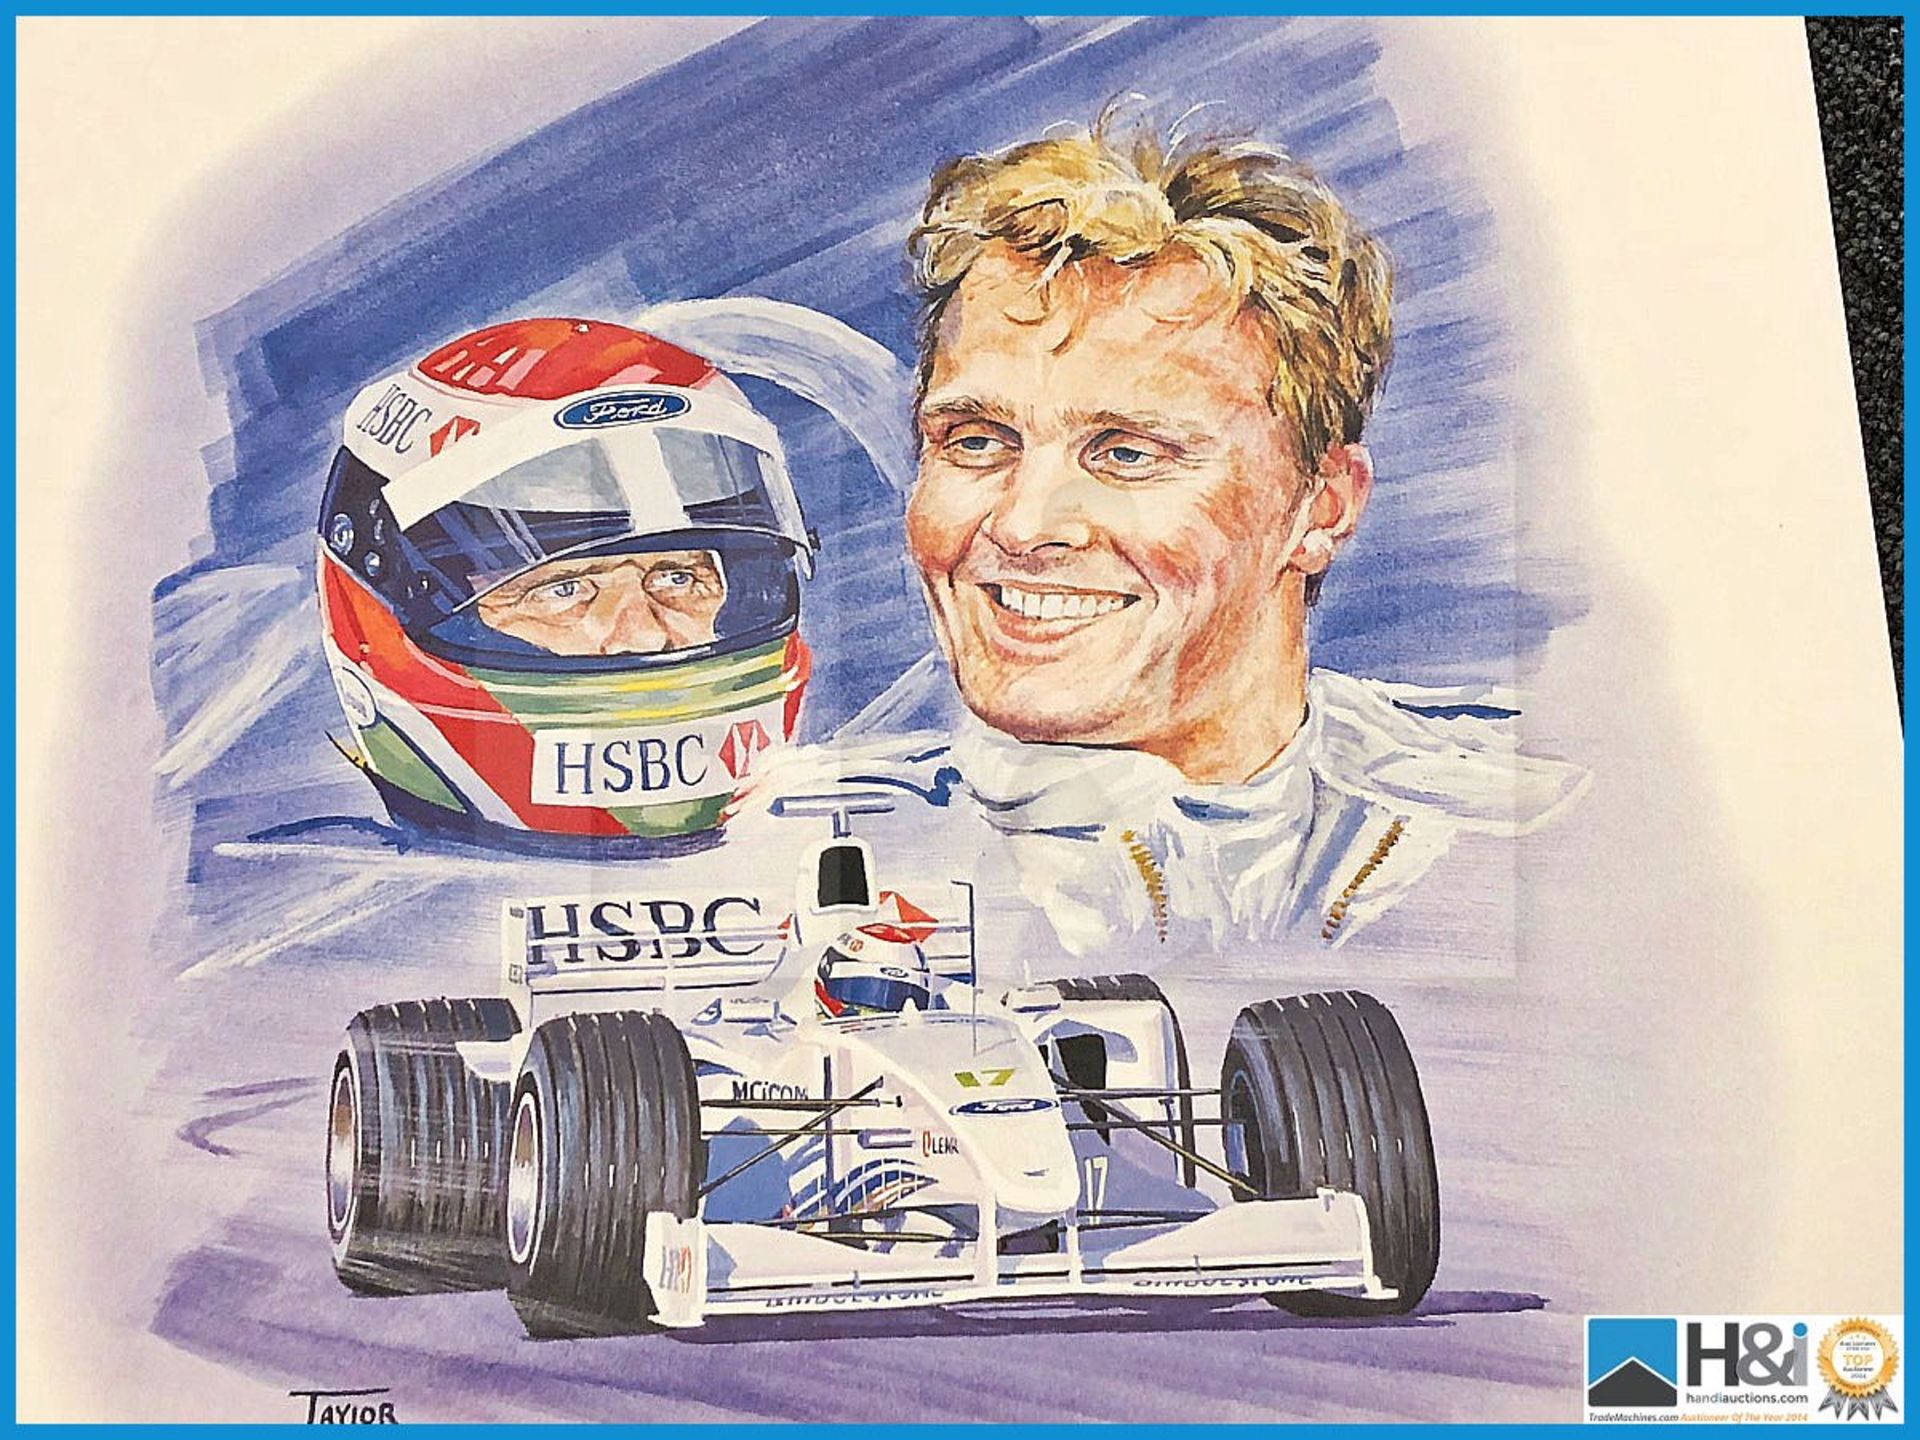 Limited edition print of Johnny Herbert - Stewart SF-3 by Simon Taylor. Edition 78 of 300. Ex-Coswor - Image 2 of 4